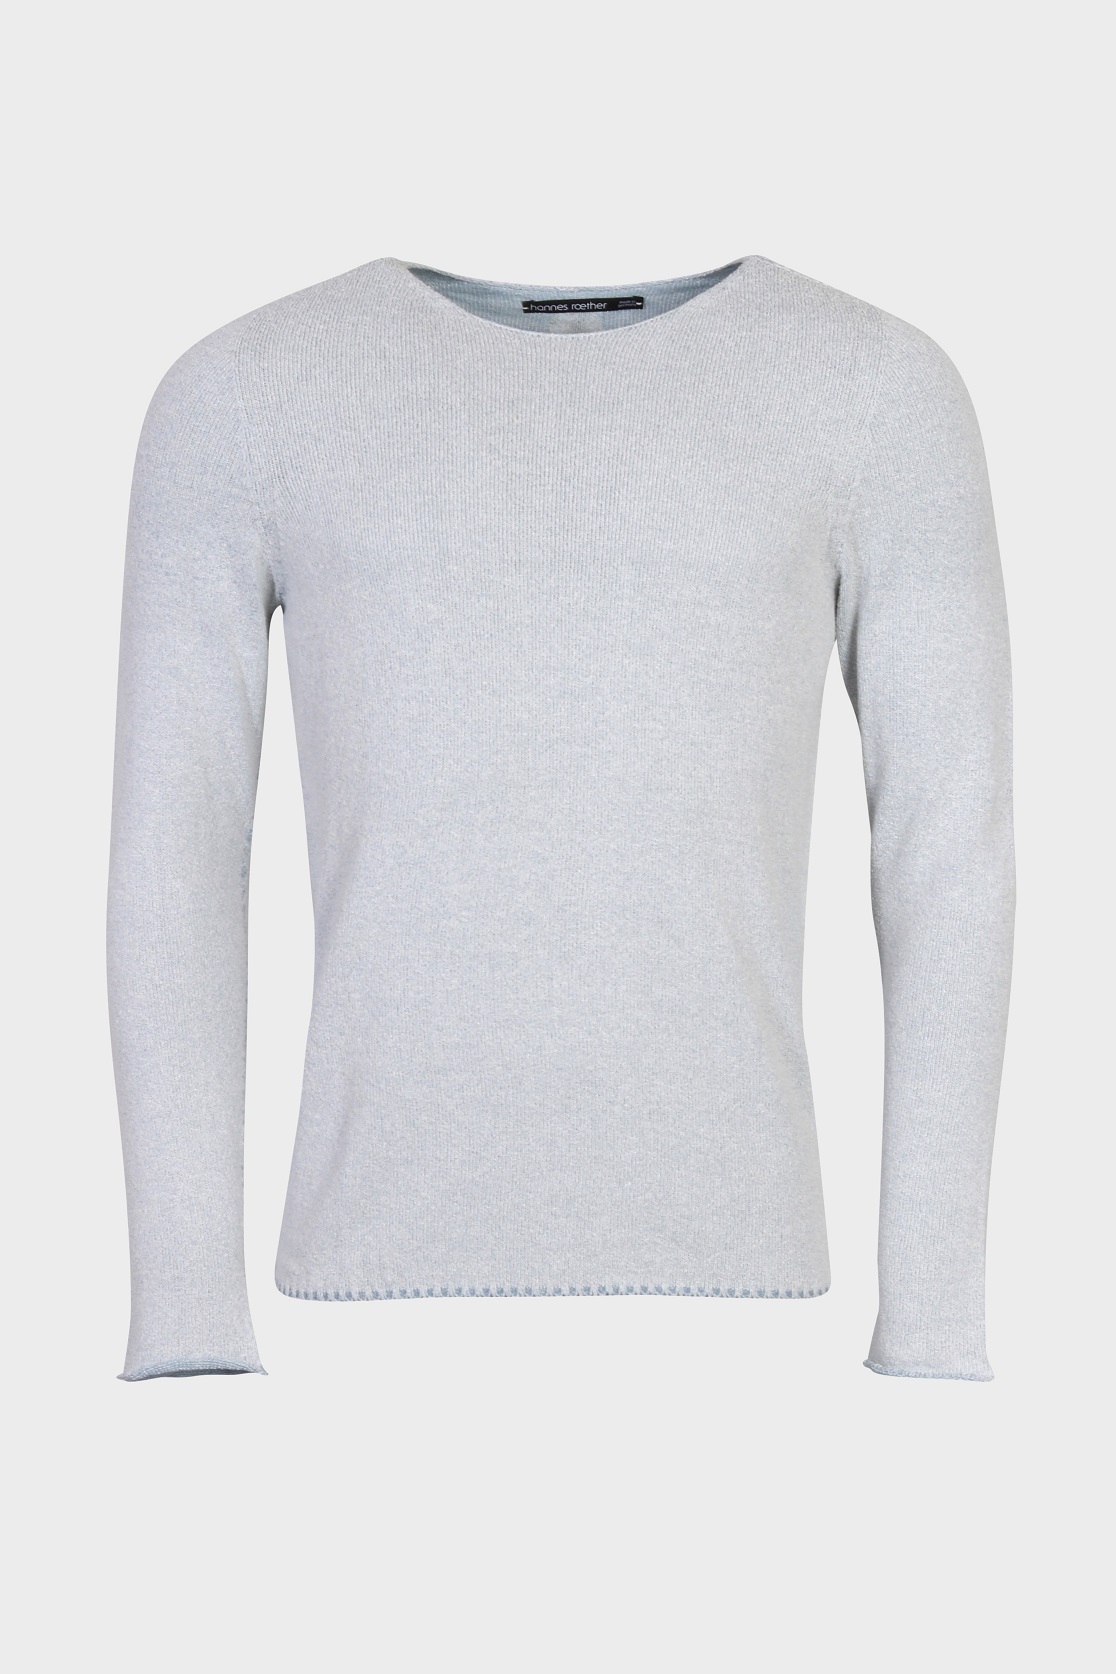 HANNES ROETHER Knit Sweater in Light Blue 2XL